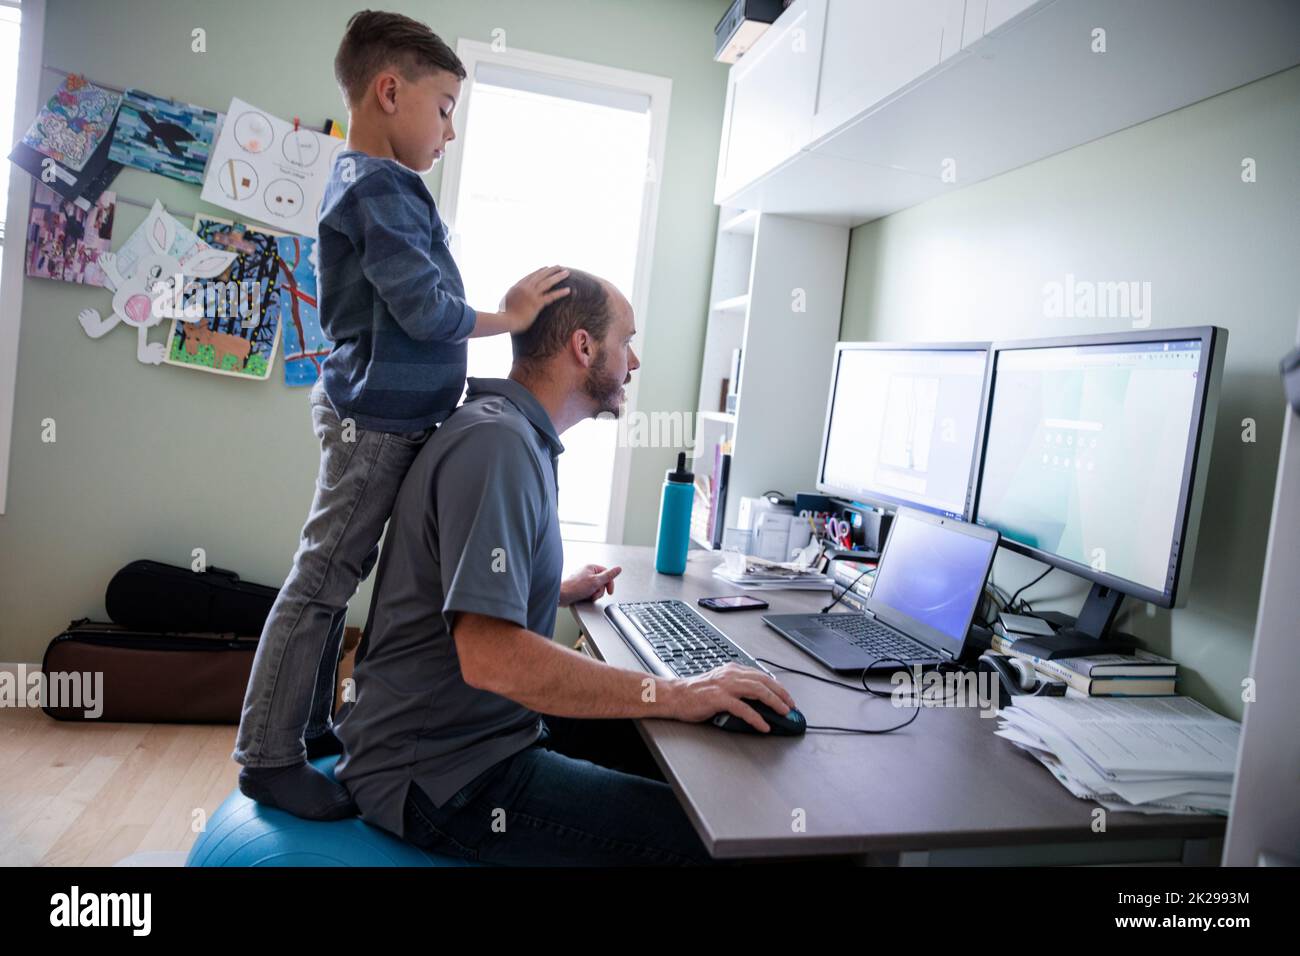 Man working on computer with son distracting him Stock Photo